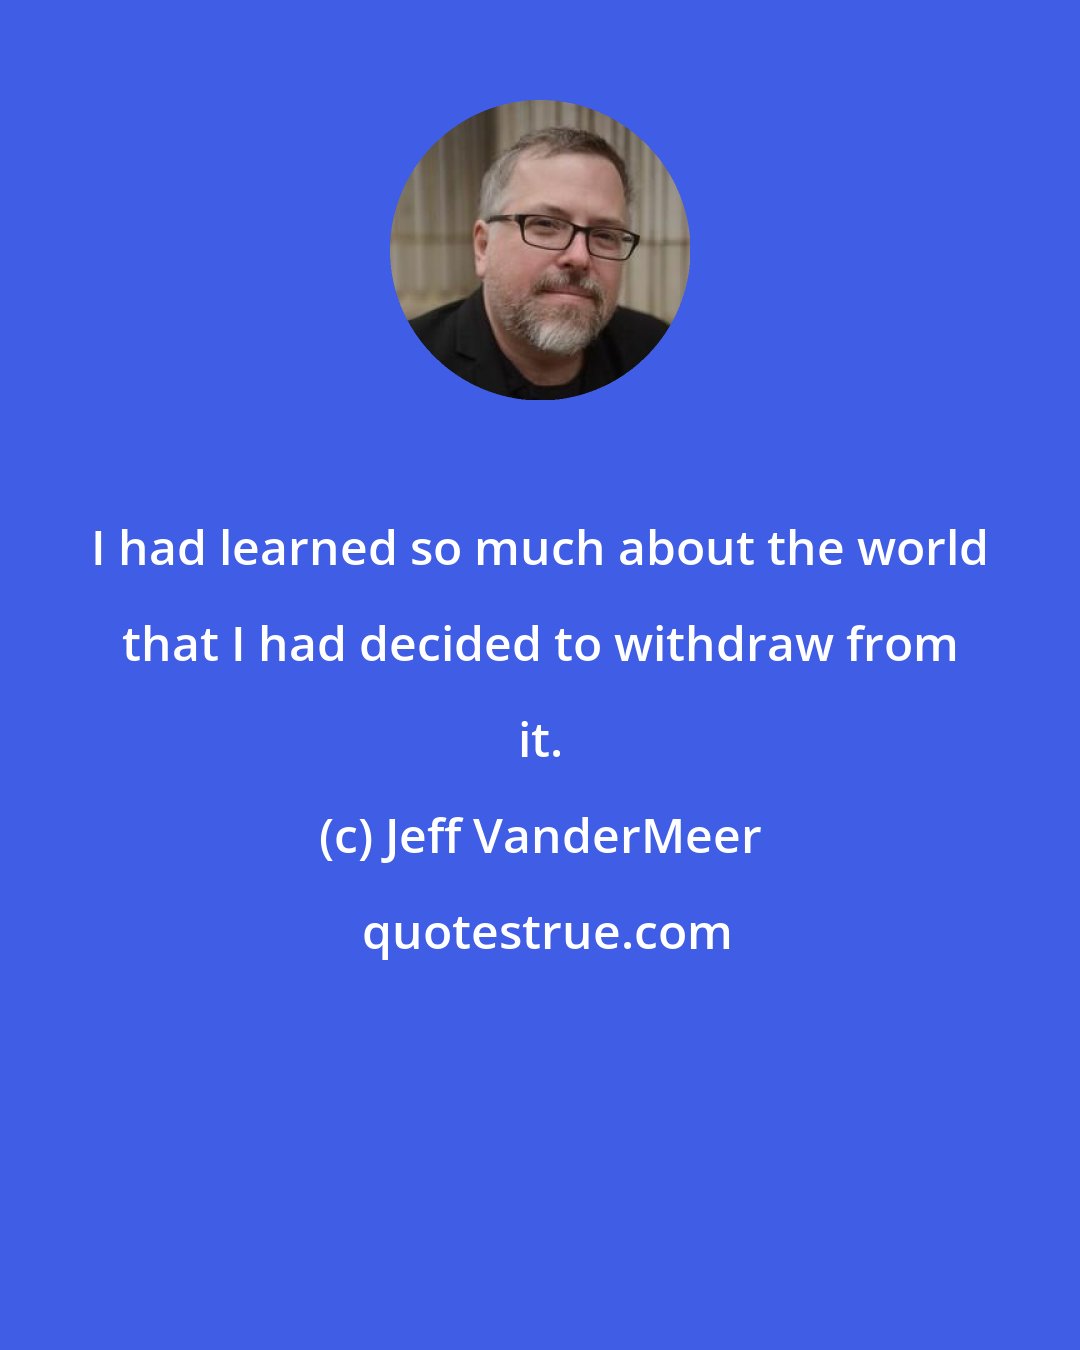 Jeff VanderMeer: I had learned so much about the world that I had decided to withdraw from it.